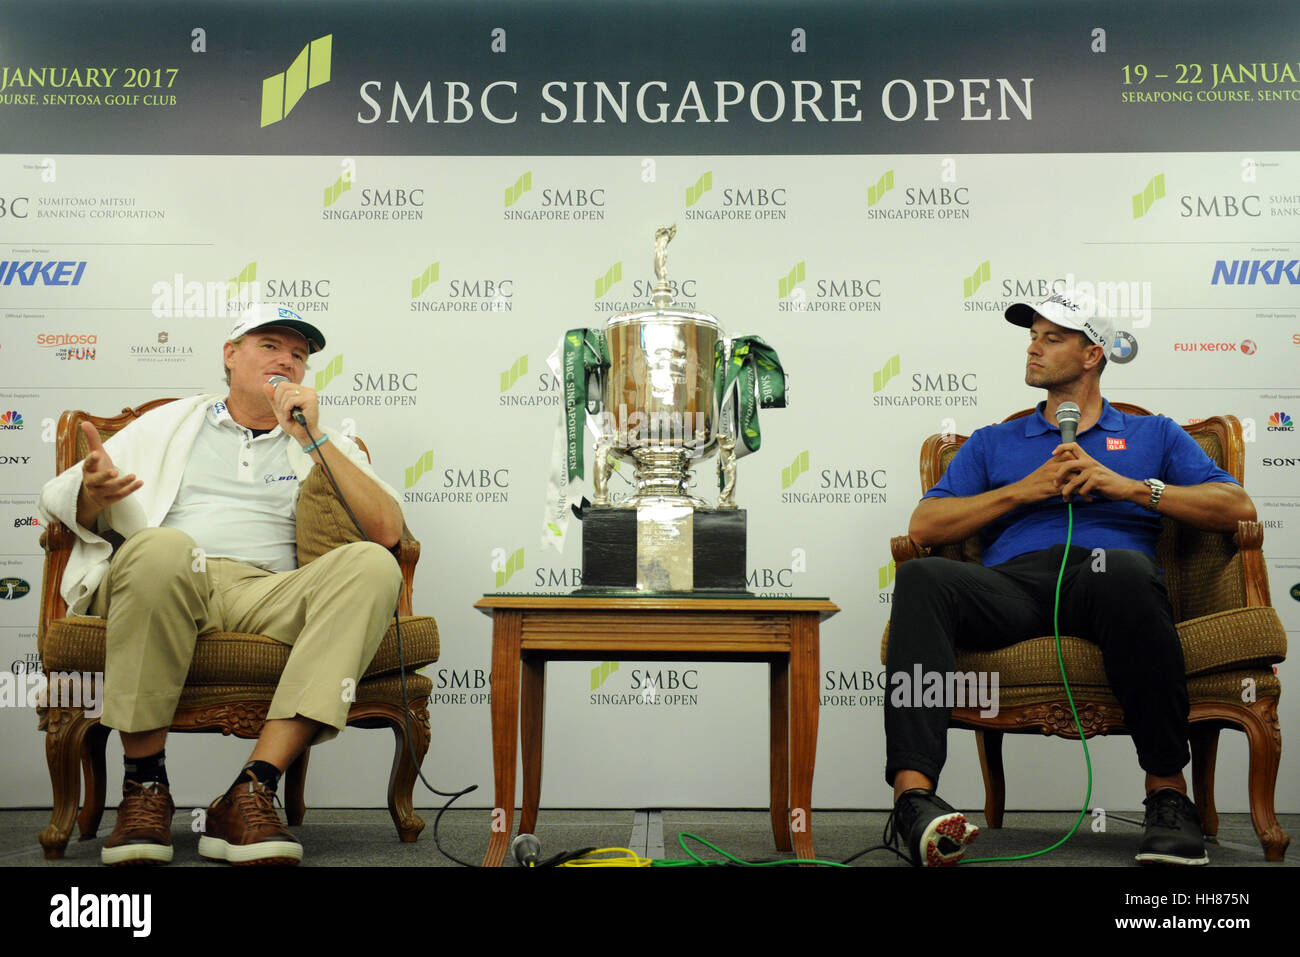 Singapore. 18th Jan, 2017. South African golfer Ernie Els(L) and Australian golfer Adam Scott attend the Singapore Open golf tournament pre-competition press conference in Singapore, Jan. 18, 2017. The Singapore Open will be held at Singapore's Sentosa Golf Club from Jan. 19 to Jan. 22. Credit: Then Chih Wey/Xinhua/Alamy Live News Stock Photo